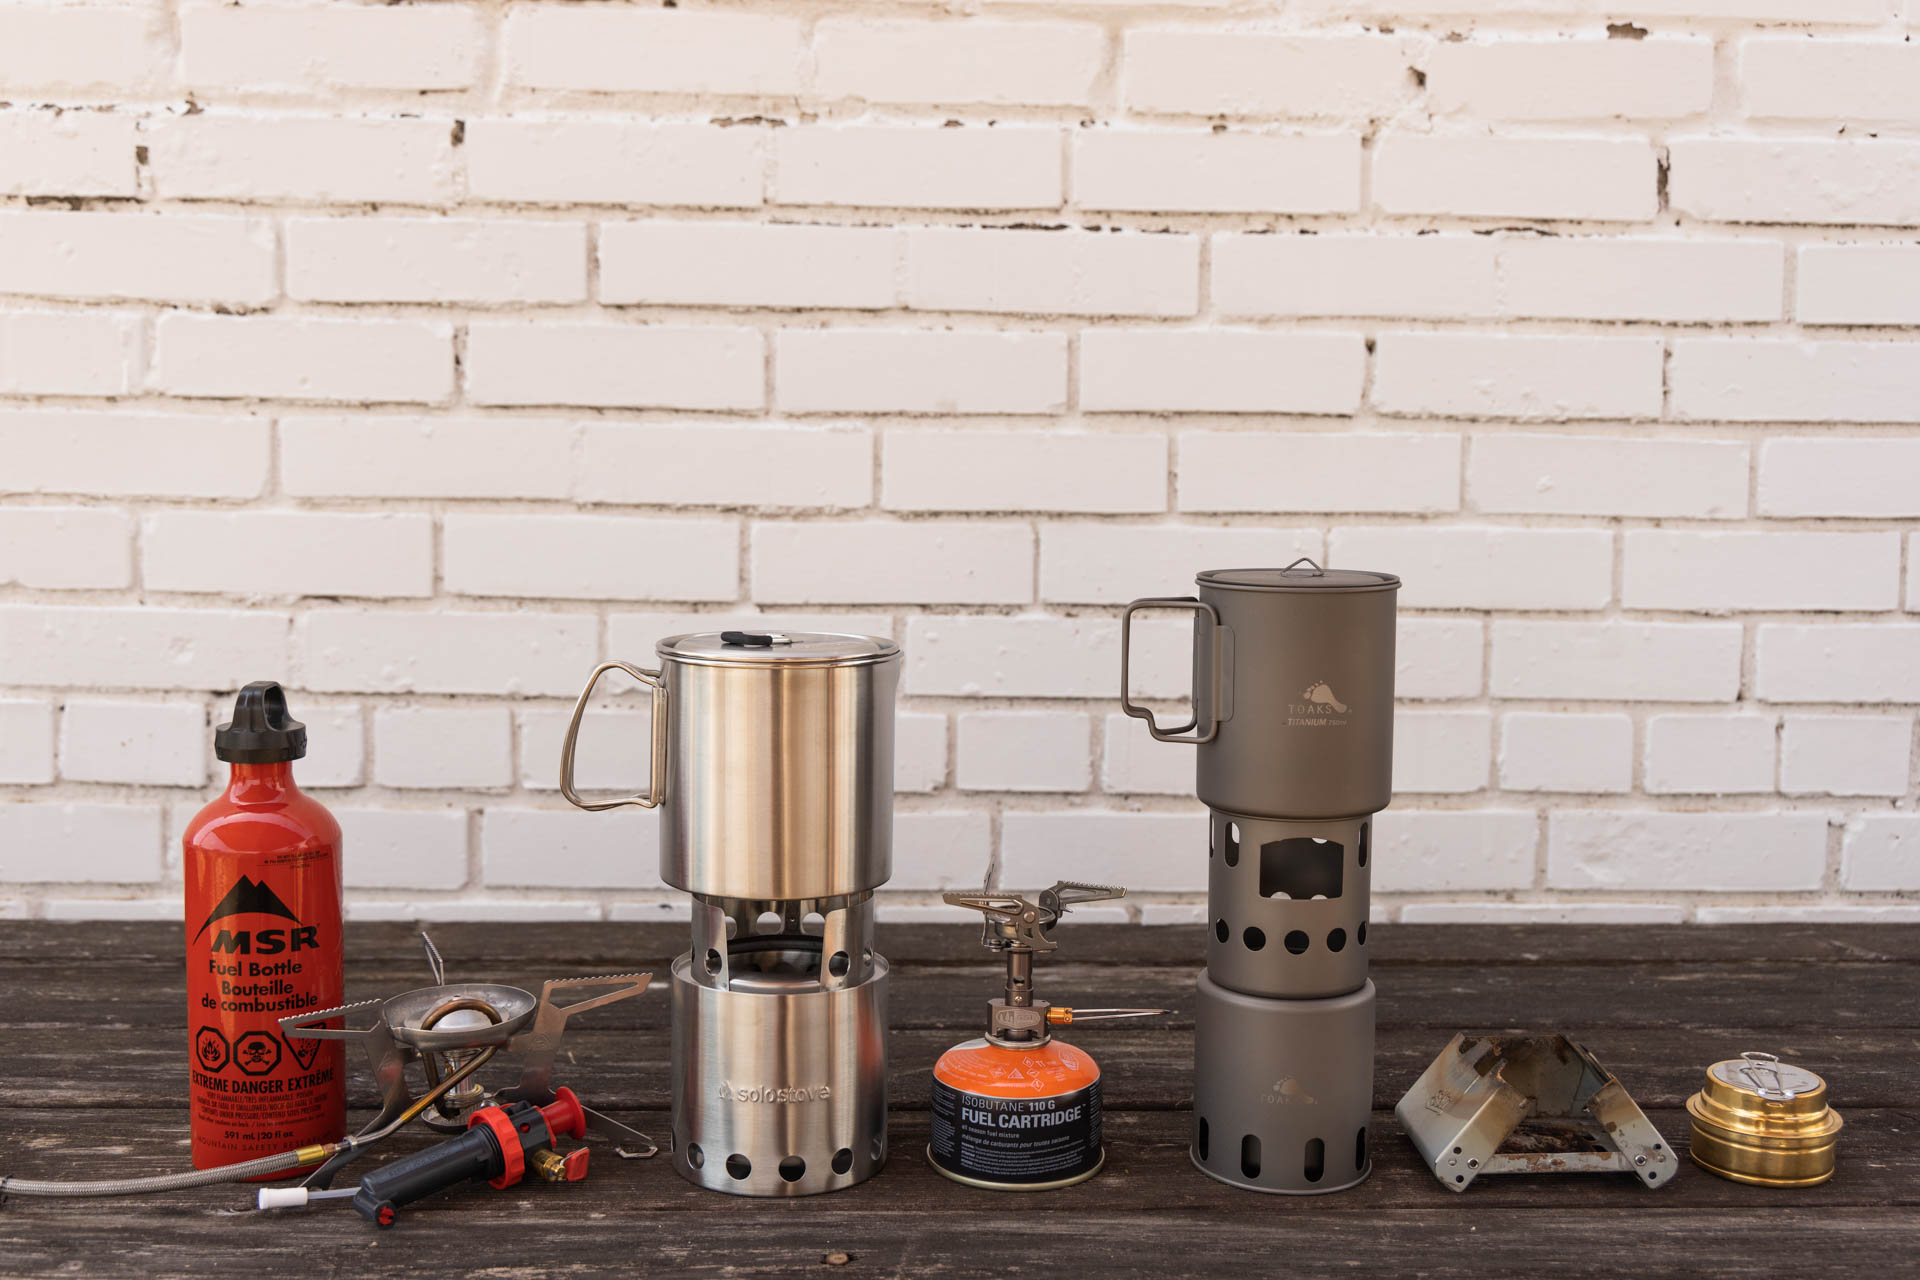 Choosing a gas cylinder for camping - Which one is best?